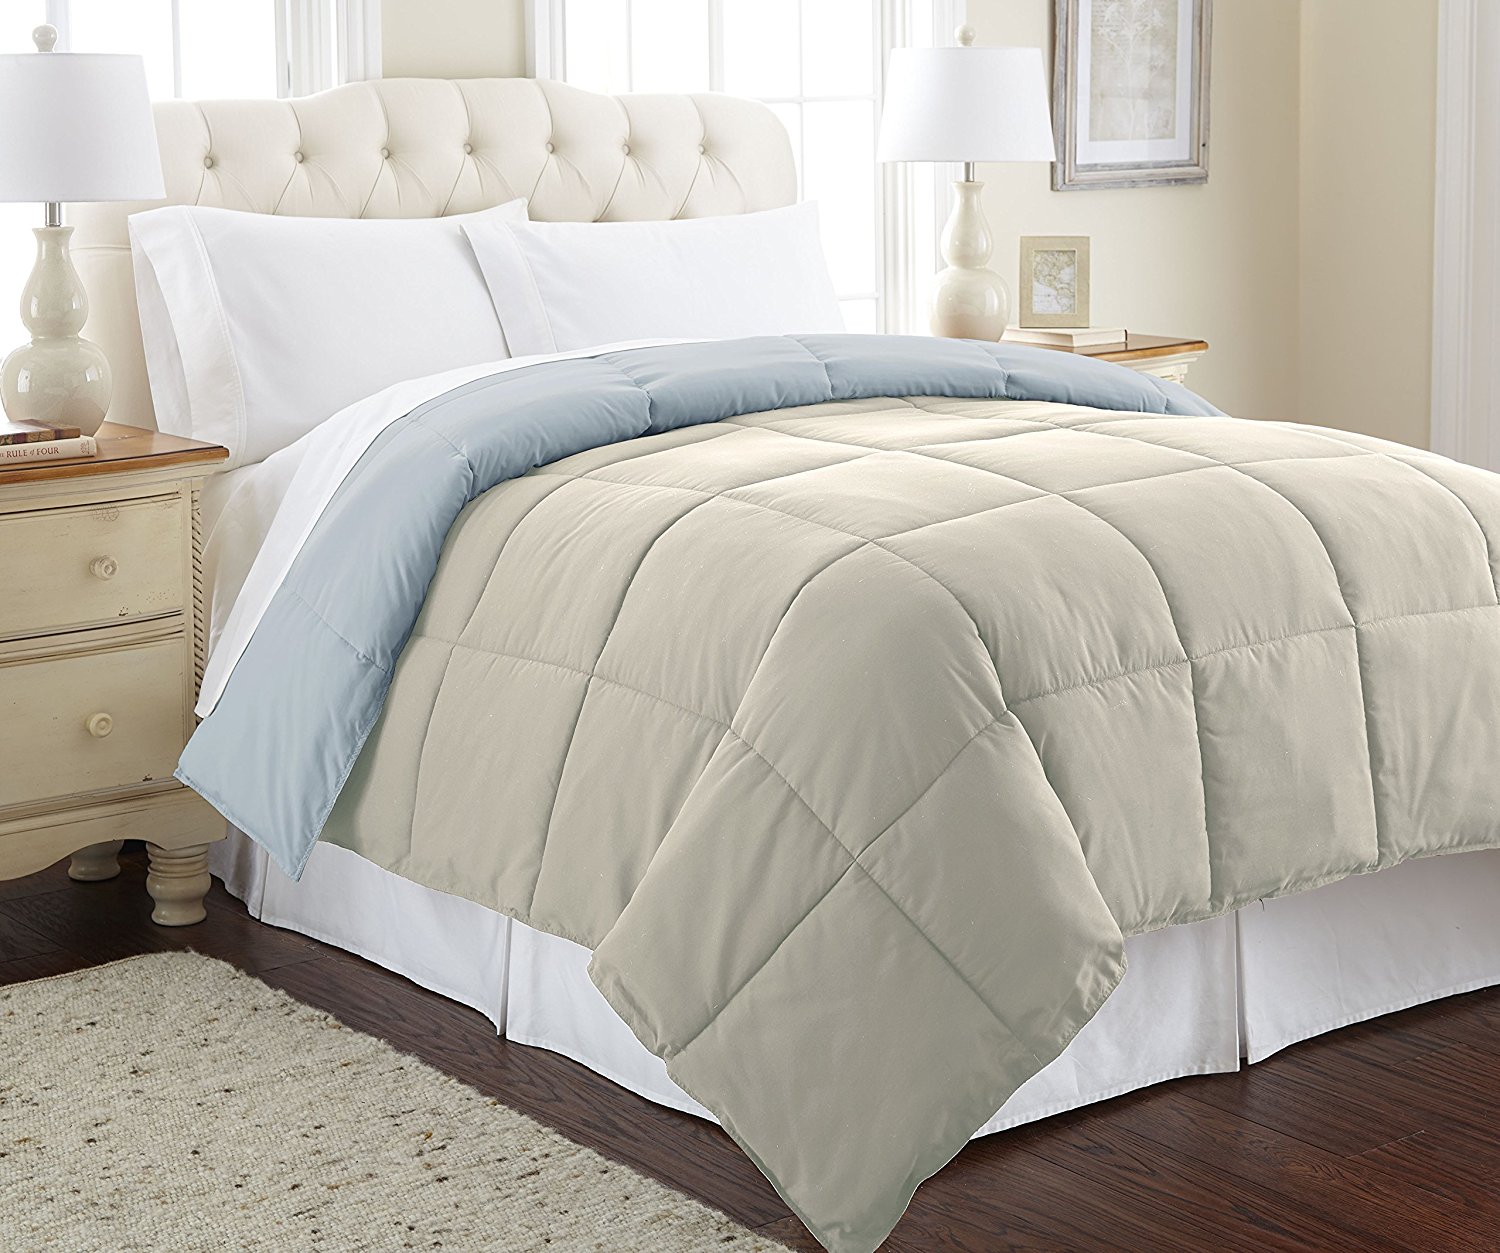 Save on Goose Down Alternative Microfiber Quilted Reversible Comforters! Just $18.90 – $24.99!